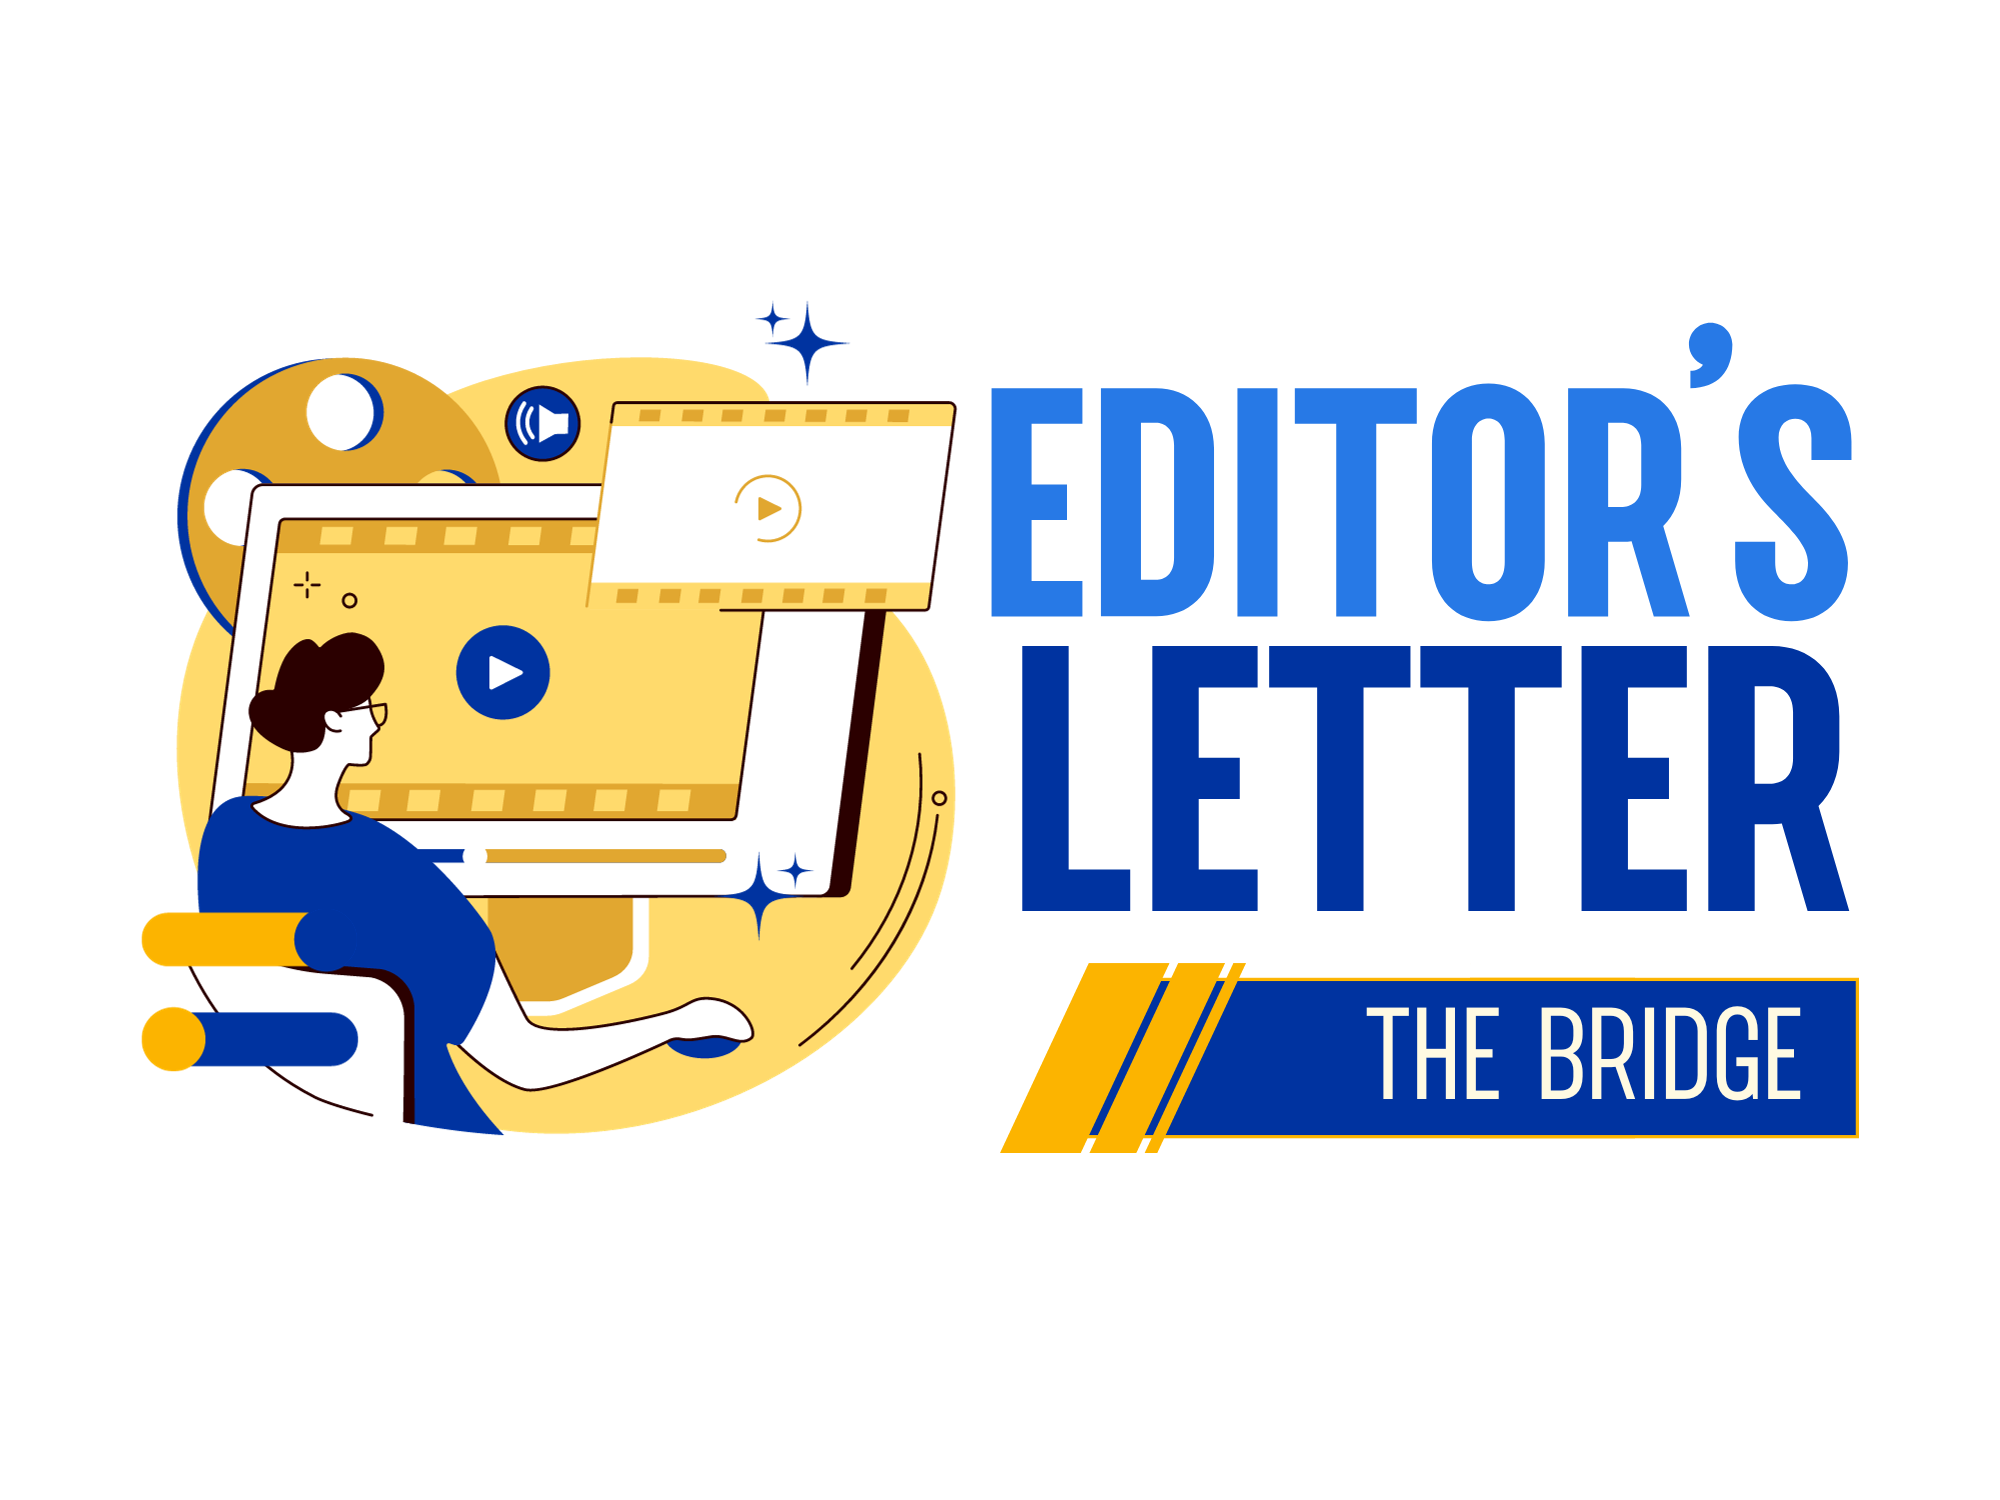 Editors Letter image with girl at computer